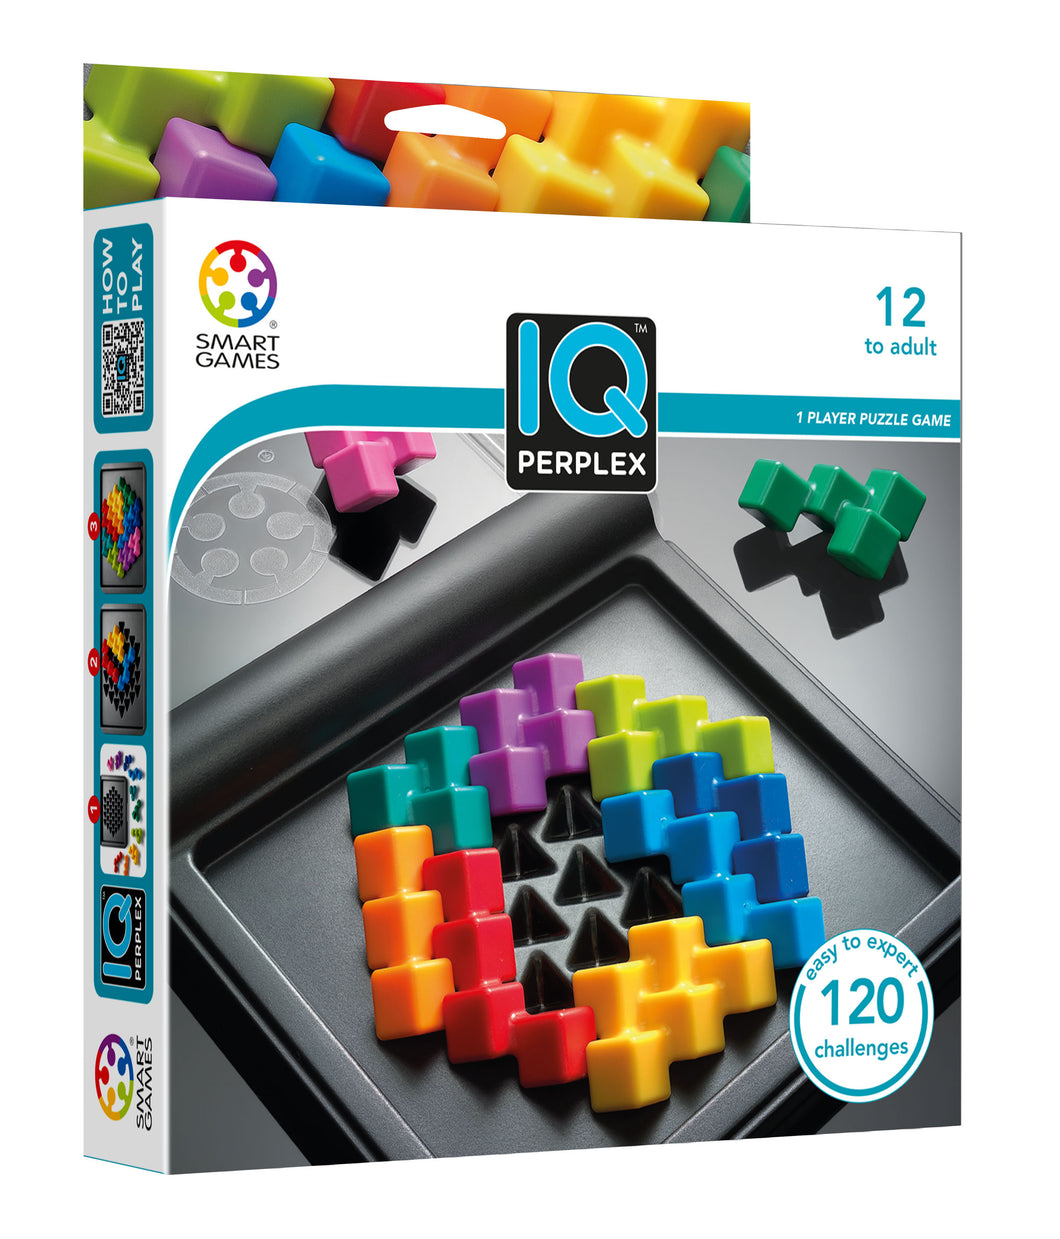 Available now - IQ Perplex - NEW!